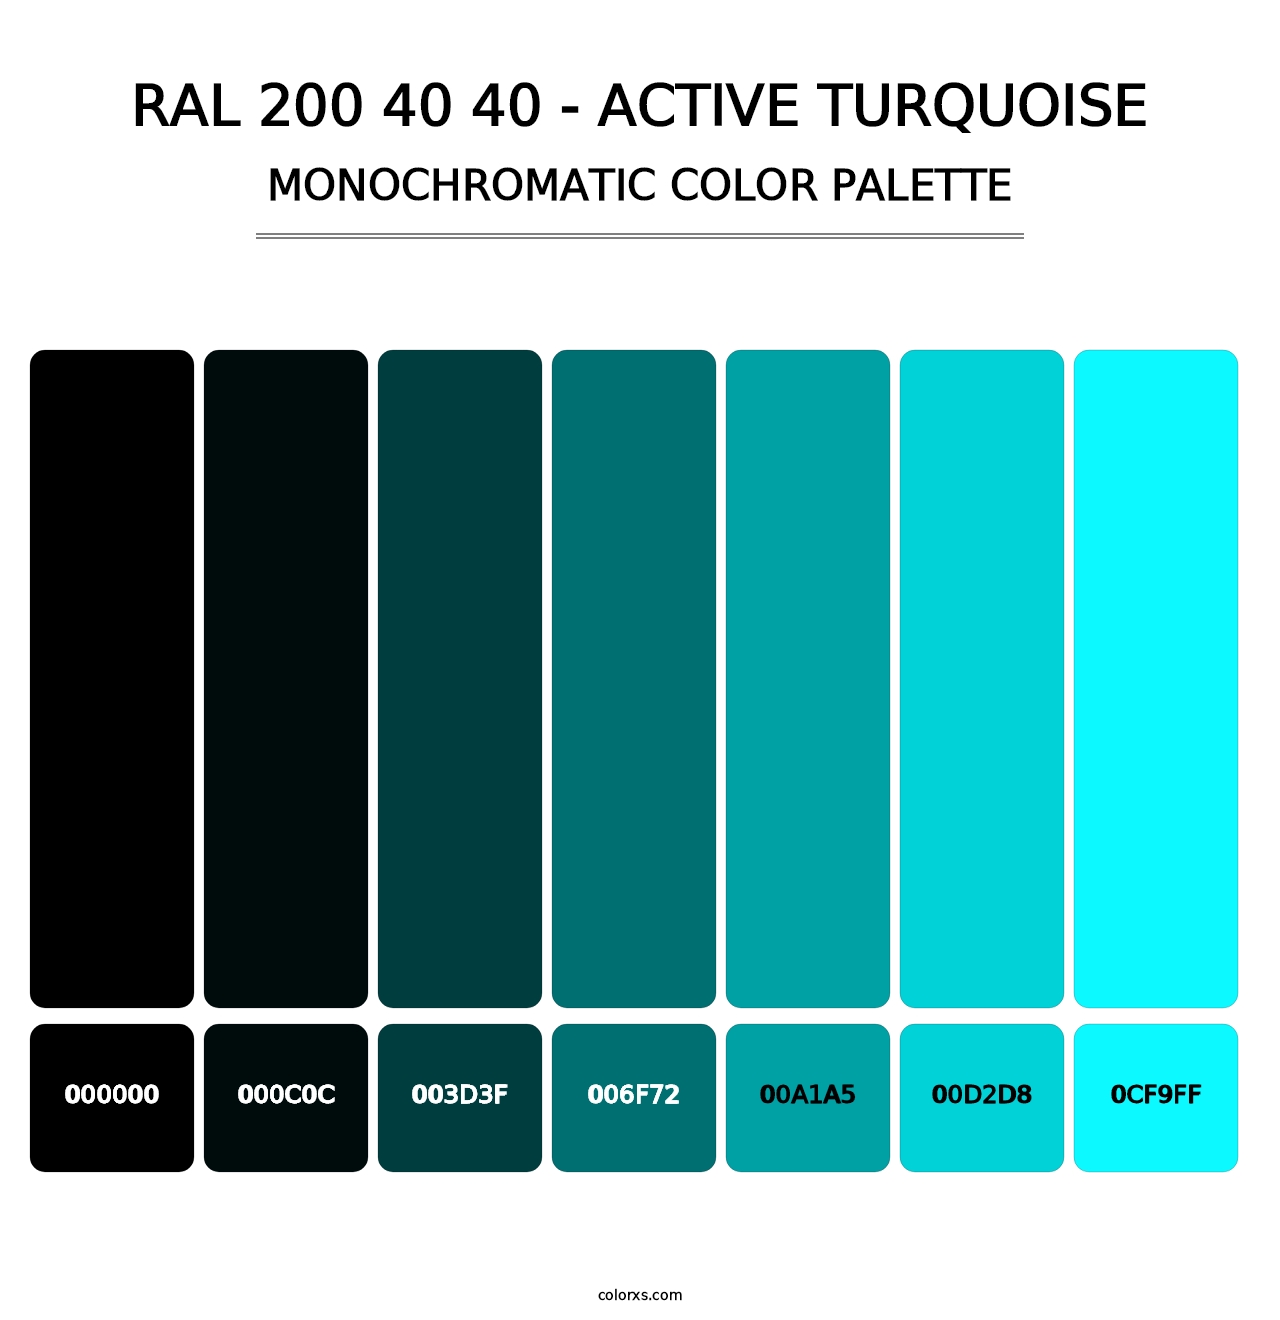 RAL 200 40 40 - Active Turquoise - Monochromatic Color Palette